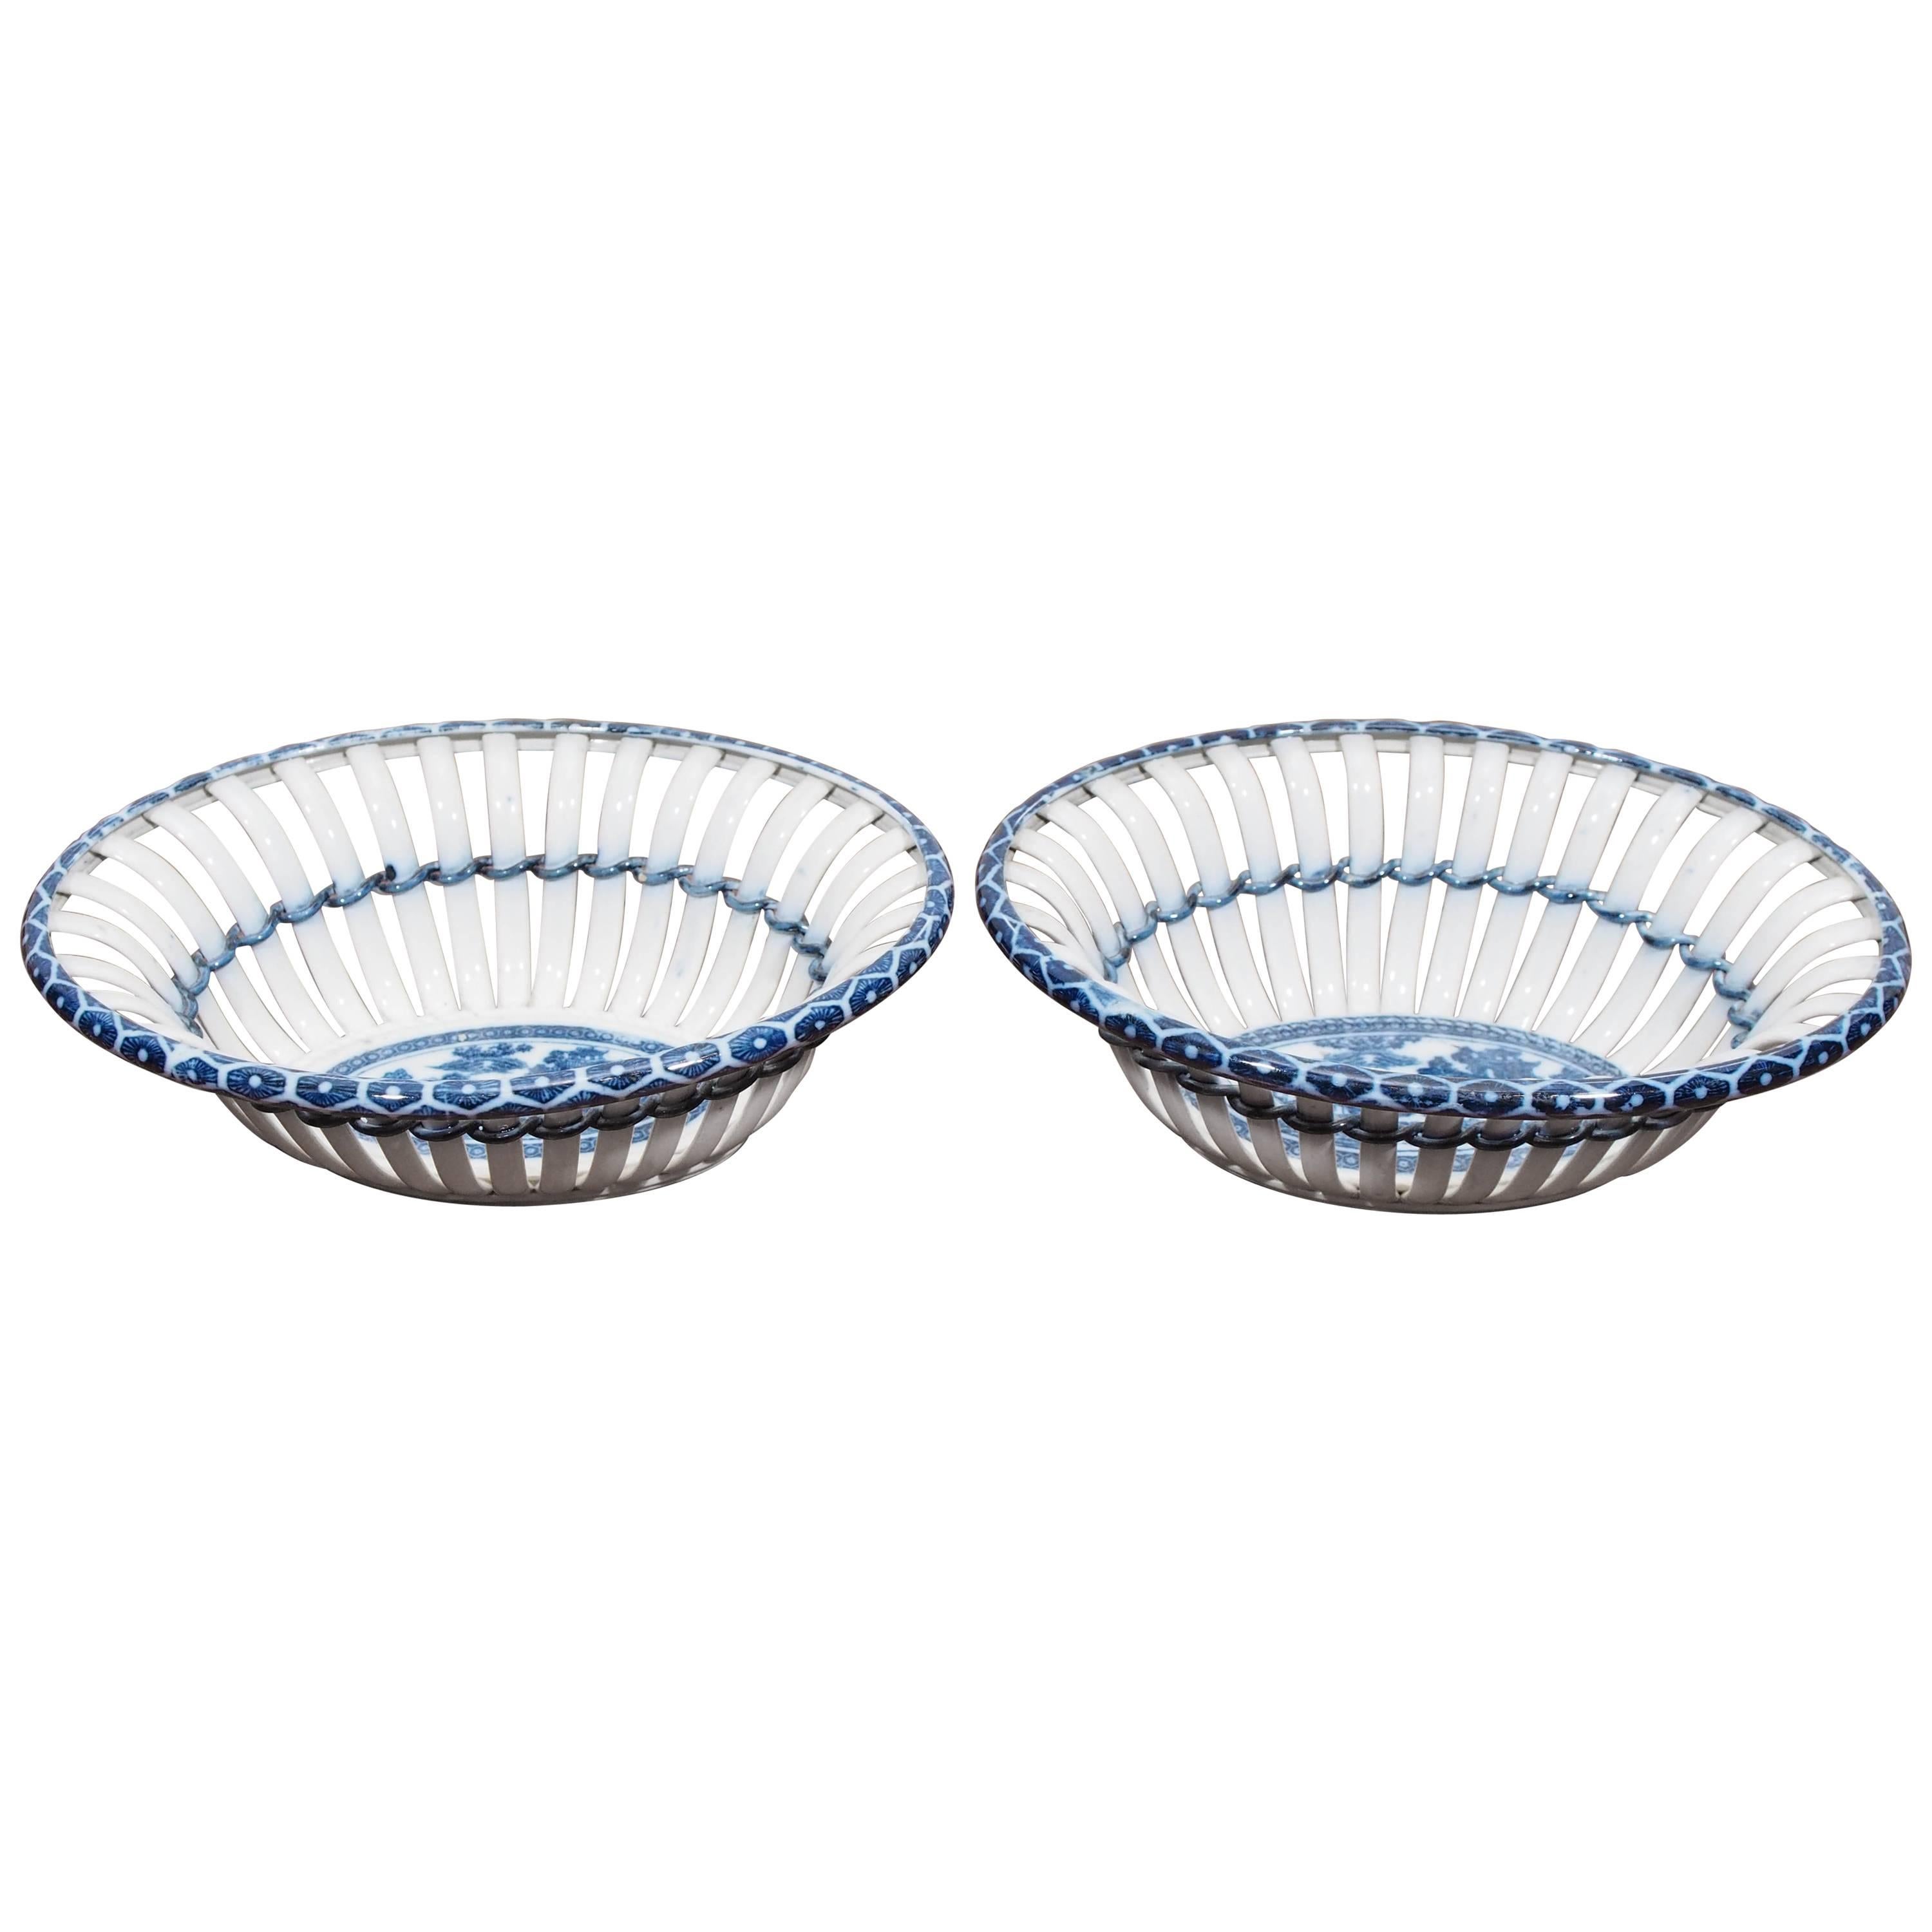 Pair of Blue and White Chestnut Baskets For Sale